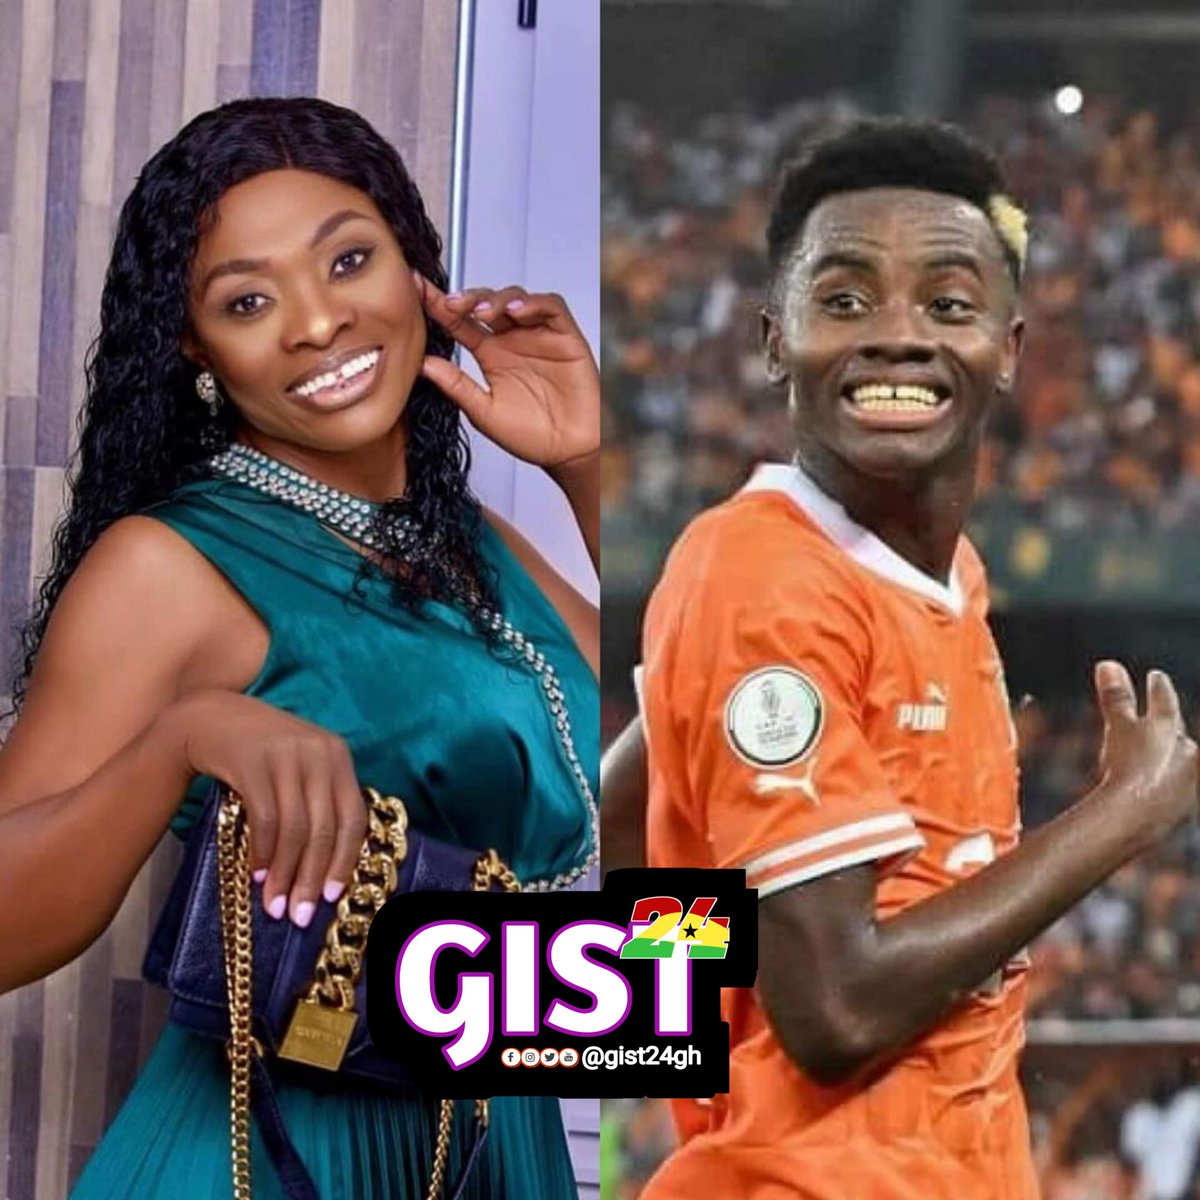 🌟⚽️ Ghanaians are drawing parallels between Britain's left winger Simo Adingra and evangelist Asamoah. 

What do you think this resemblance signifies? 

#NoDNANeeded #Gist24gh 🤔🇬🇭🇨🇮